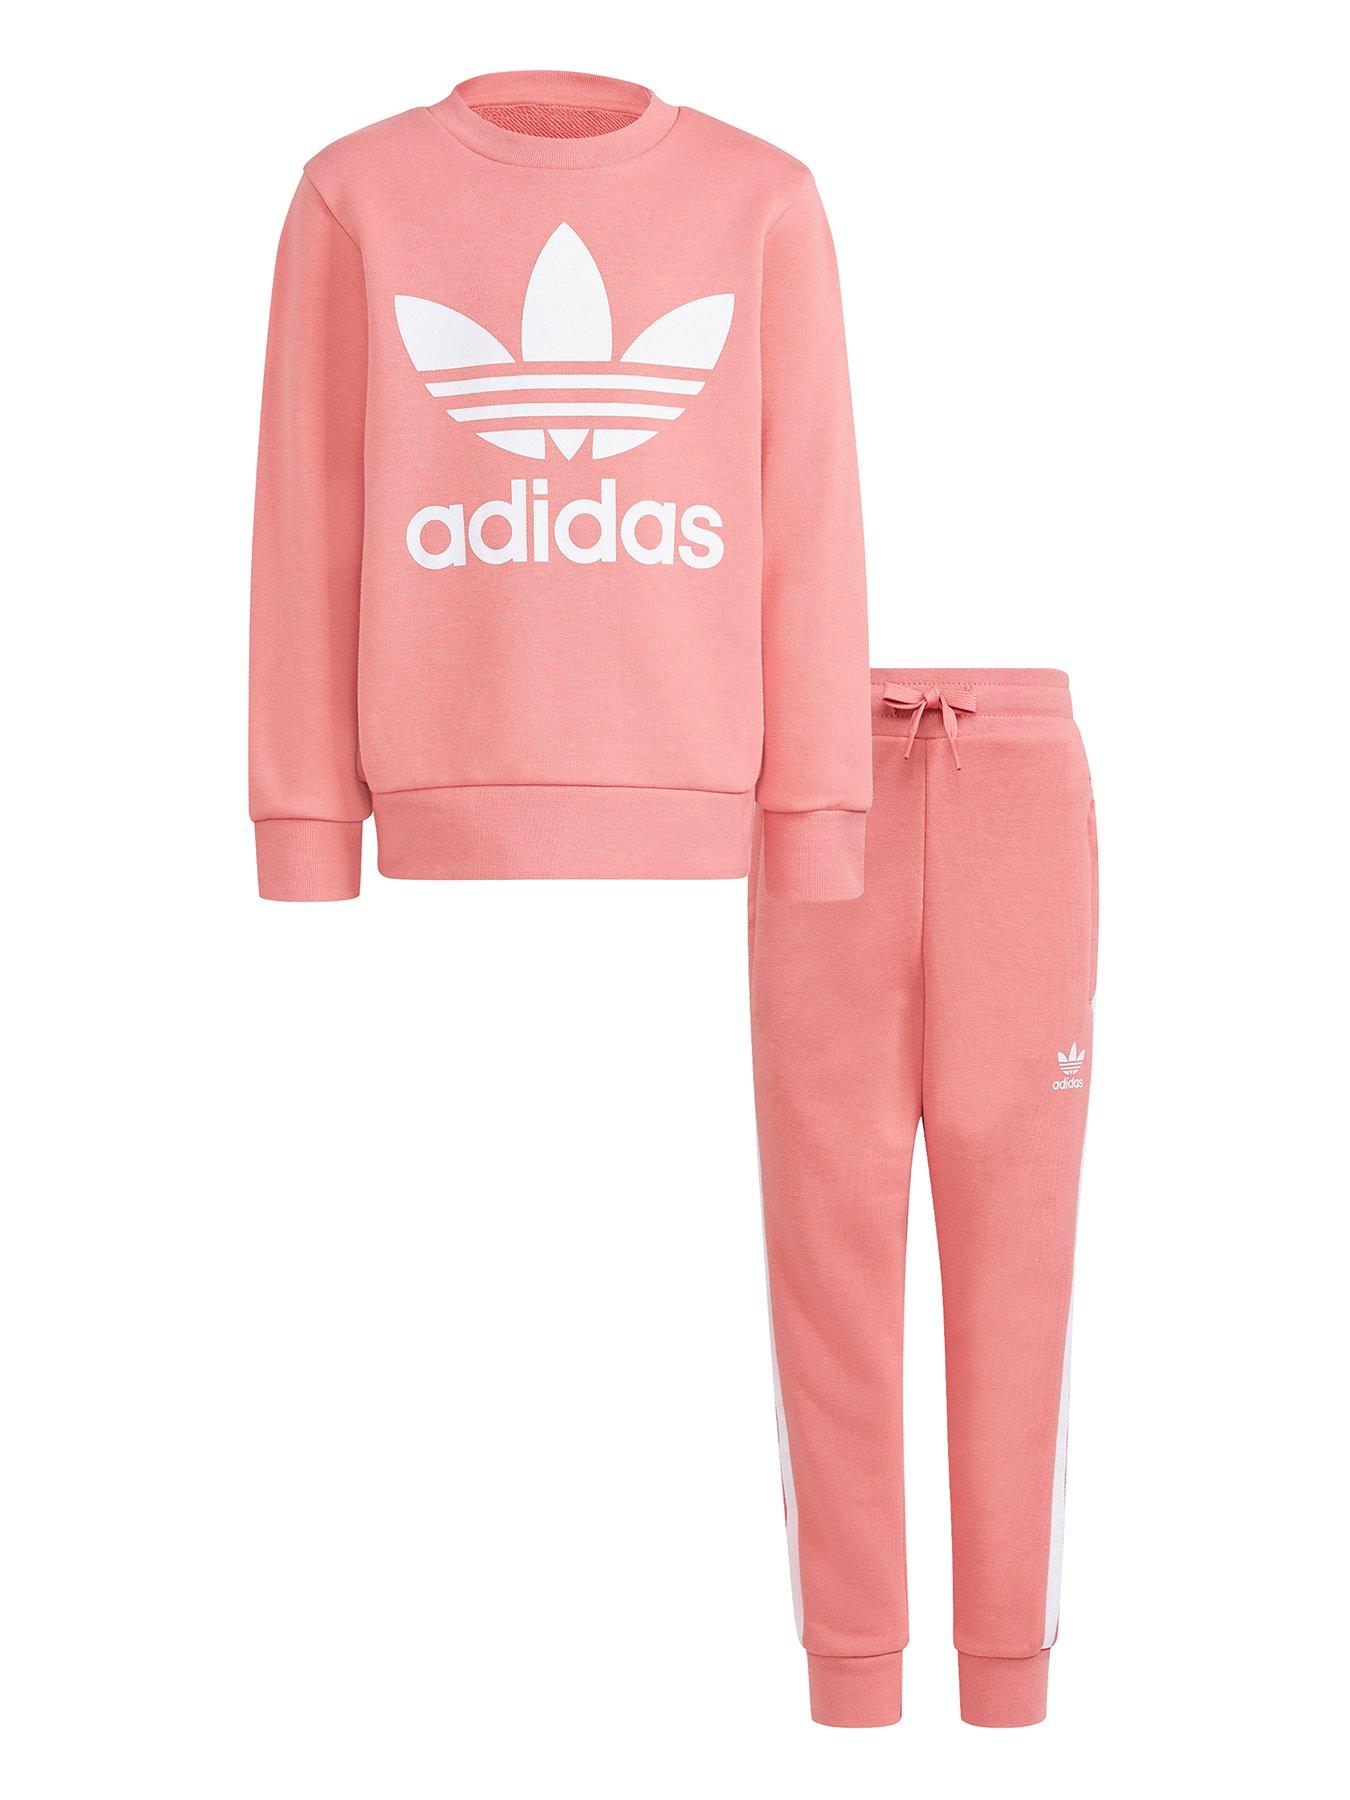 womens adidas tracksuit sets pink